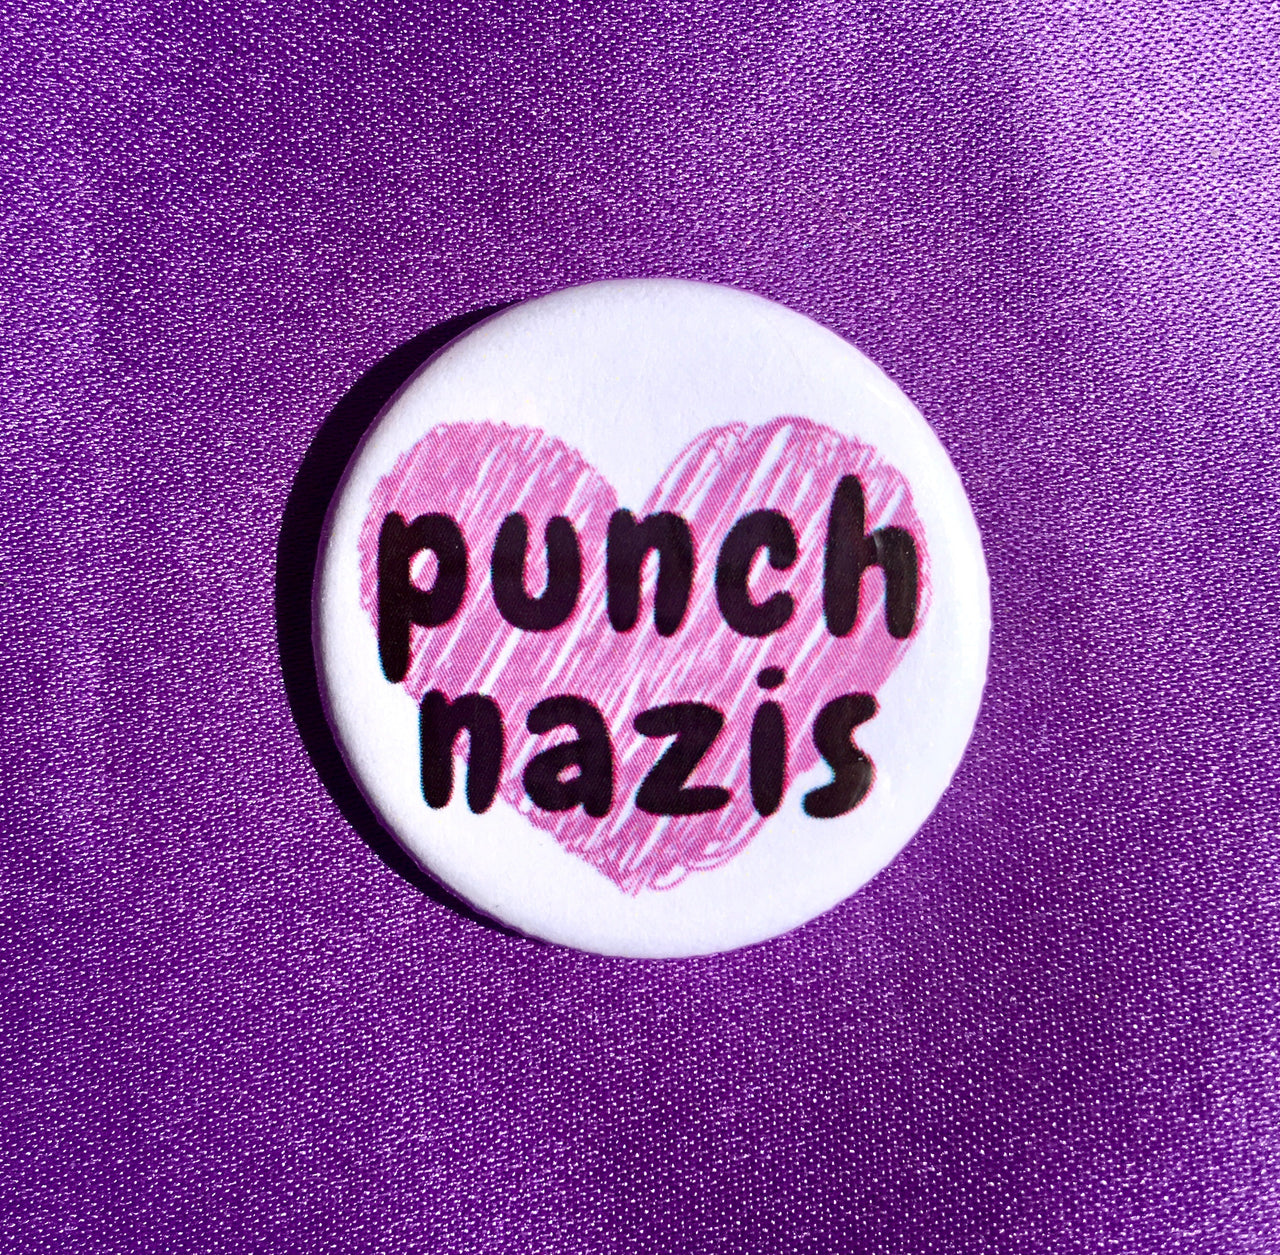 Punch Nazis - Radical Buttons